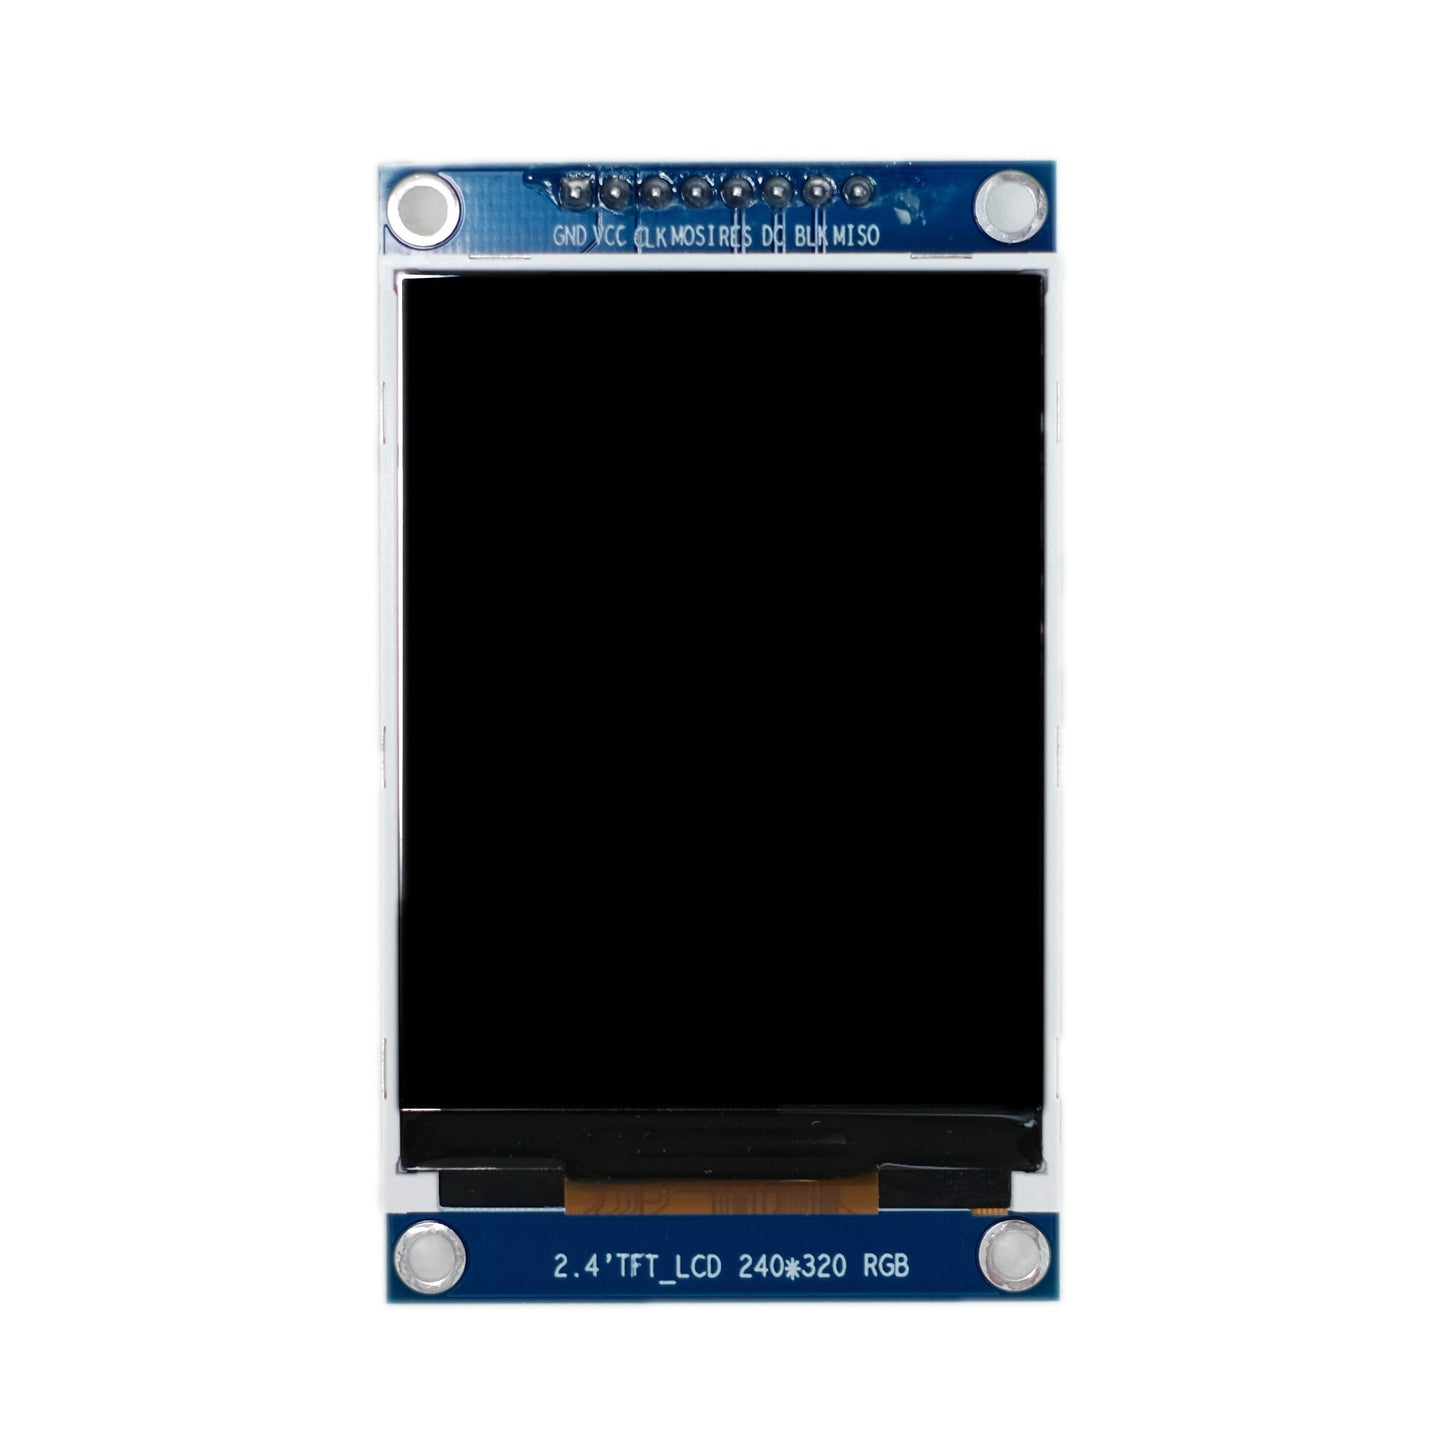 2.4 inch TFT Display Module with 240x320 resolution and 300 nits brightness, utilizing SPI interface